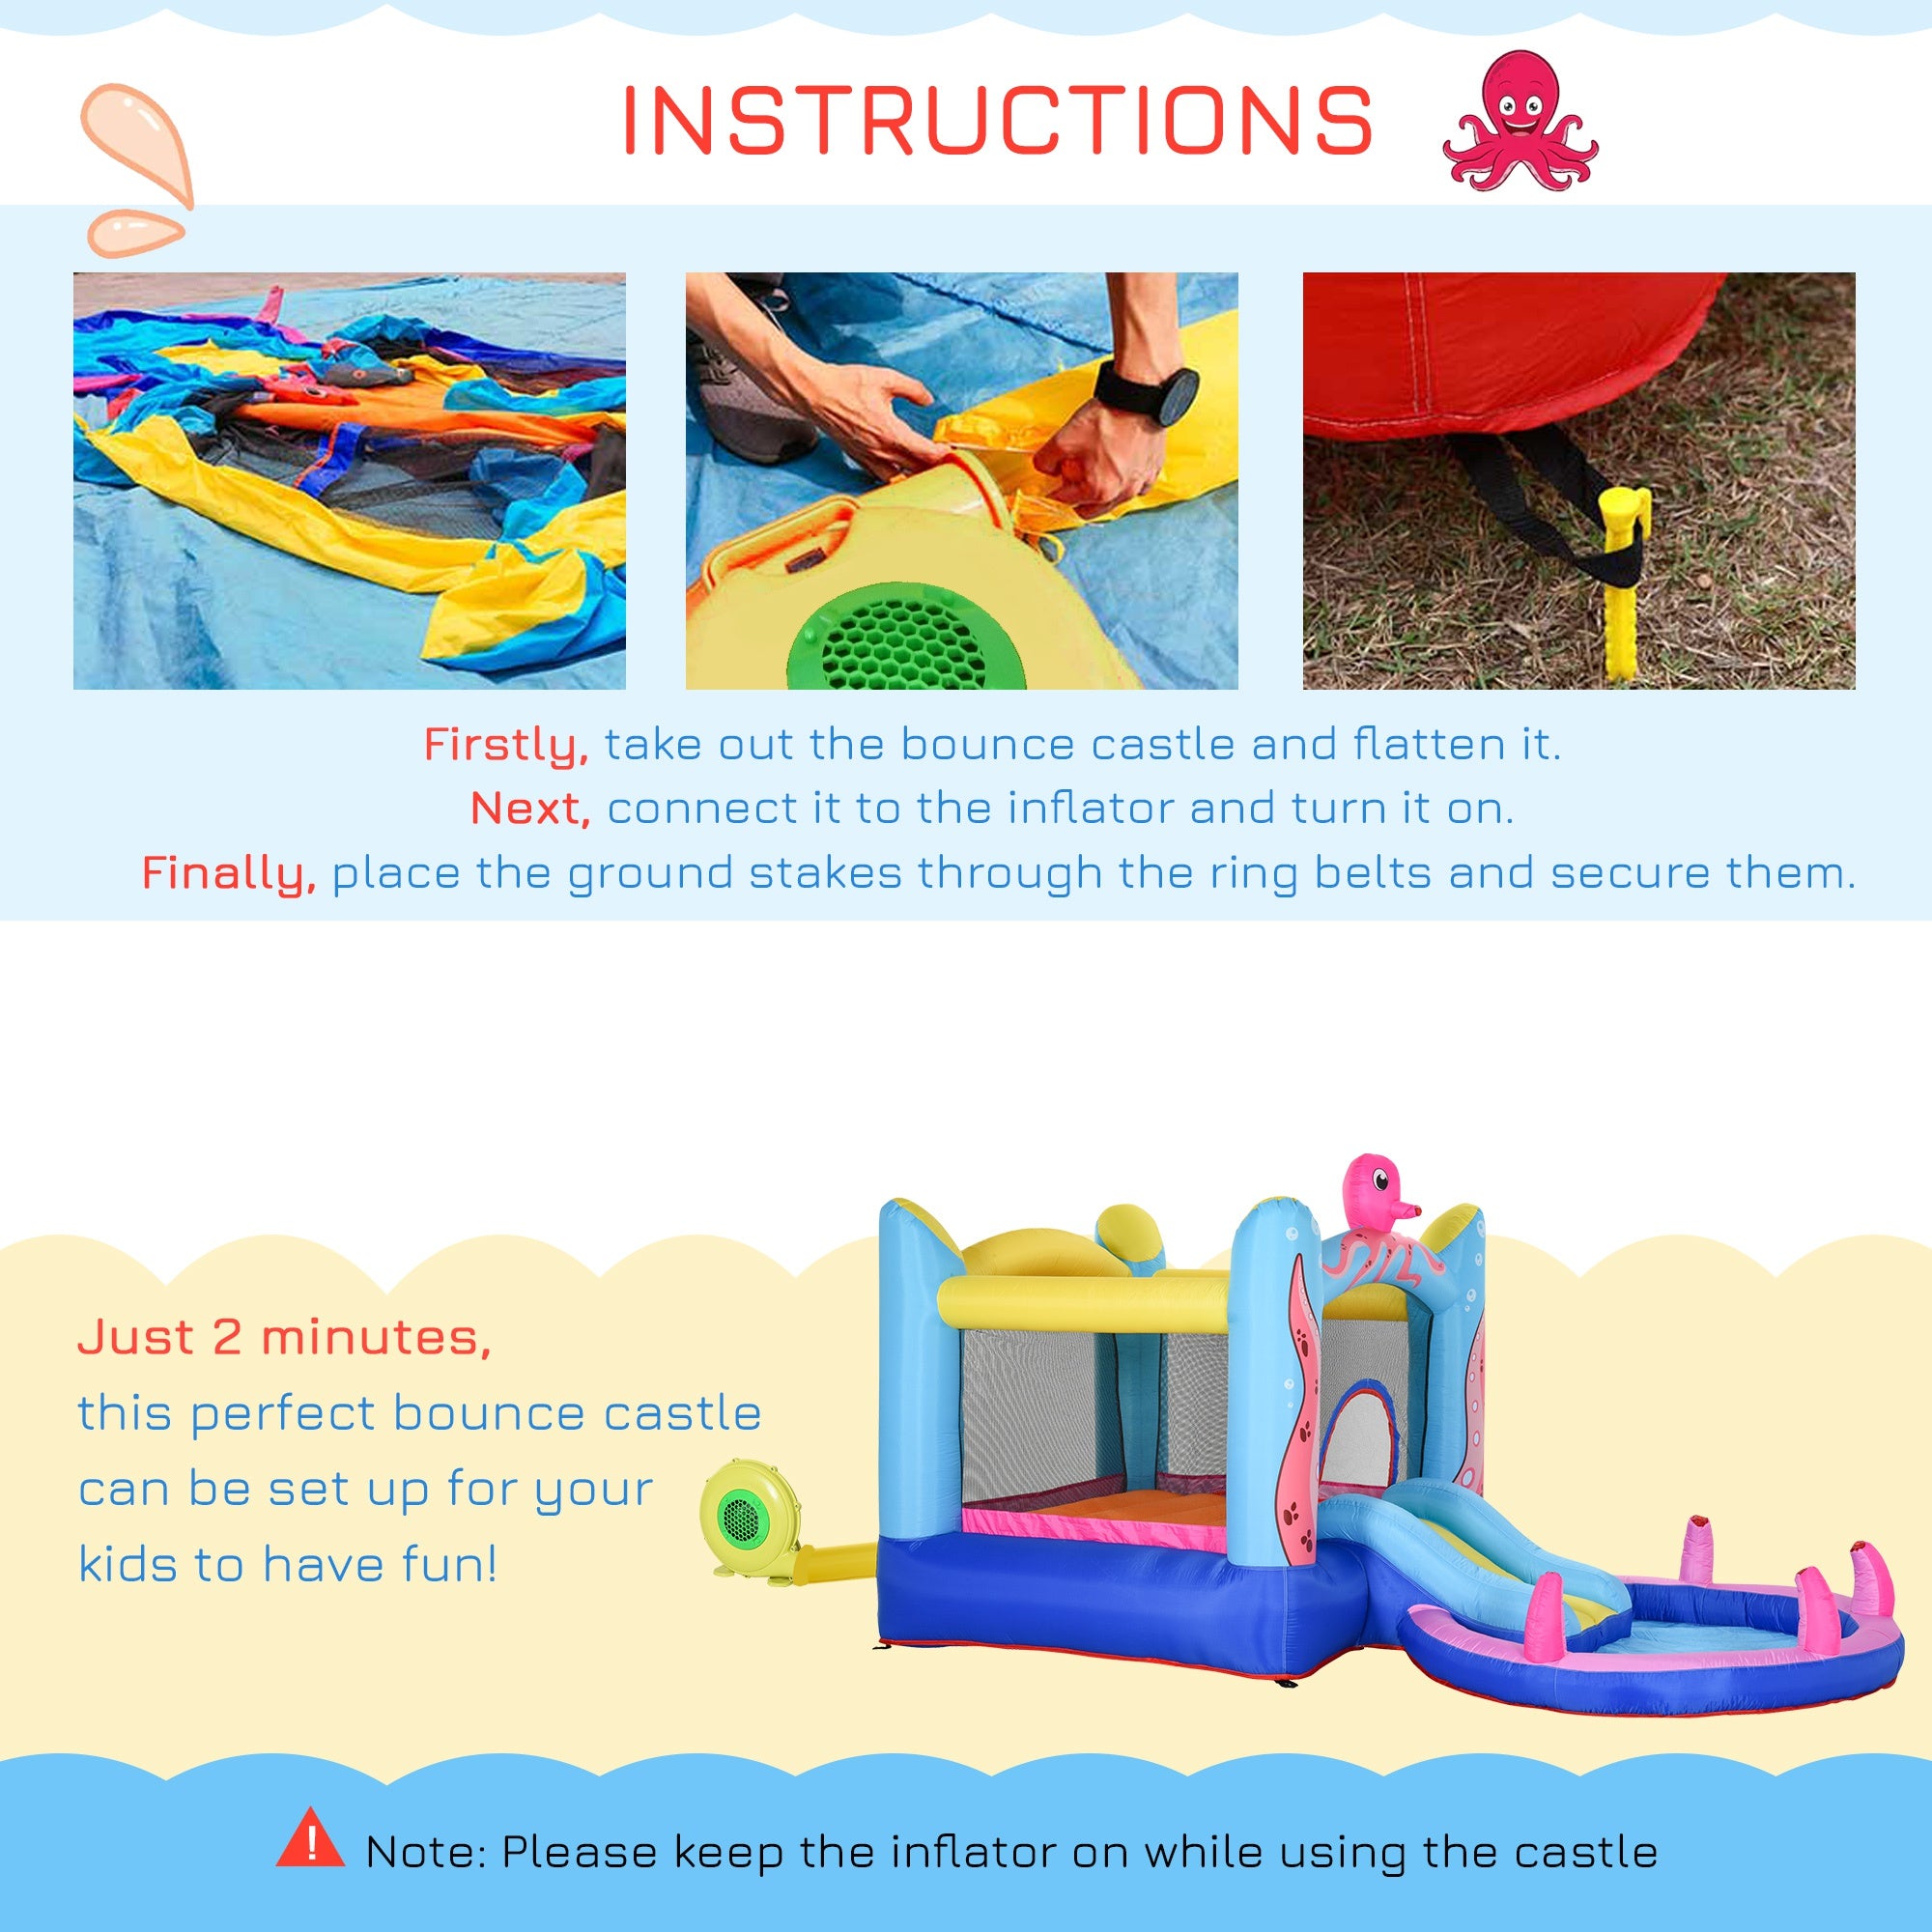 Outsunny Kids Bounce Castle House Inflatable Trampoline Slide Water Pool 3 in 1 with Inflator for Kids Age 3-12 Octopus Design 3.8 x 2 x 1.8m - Inspirely